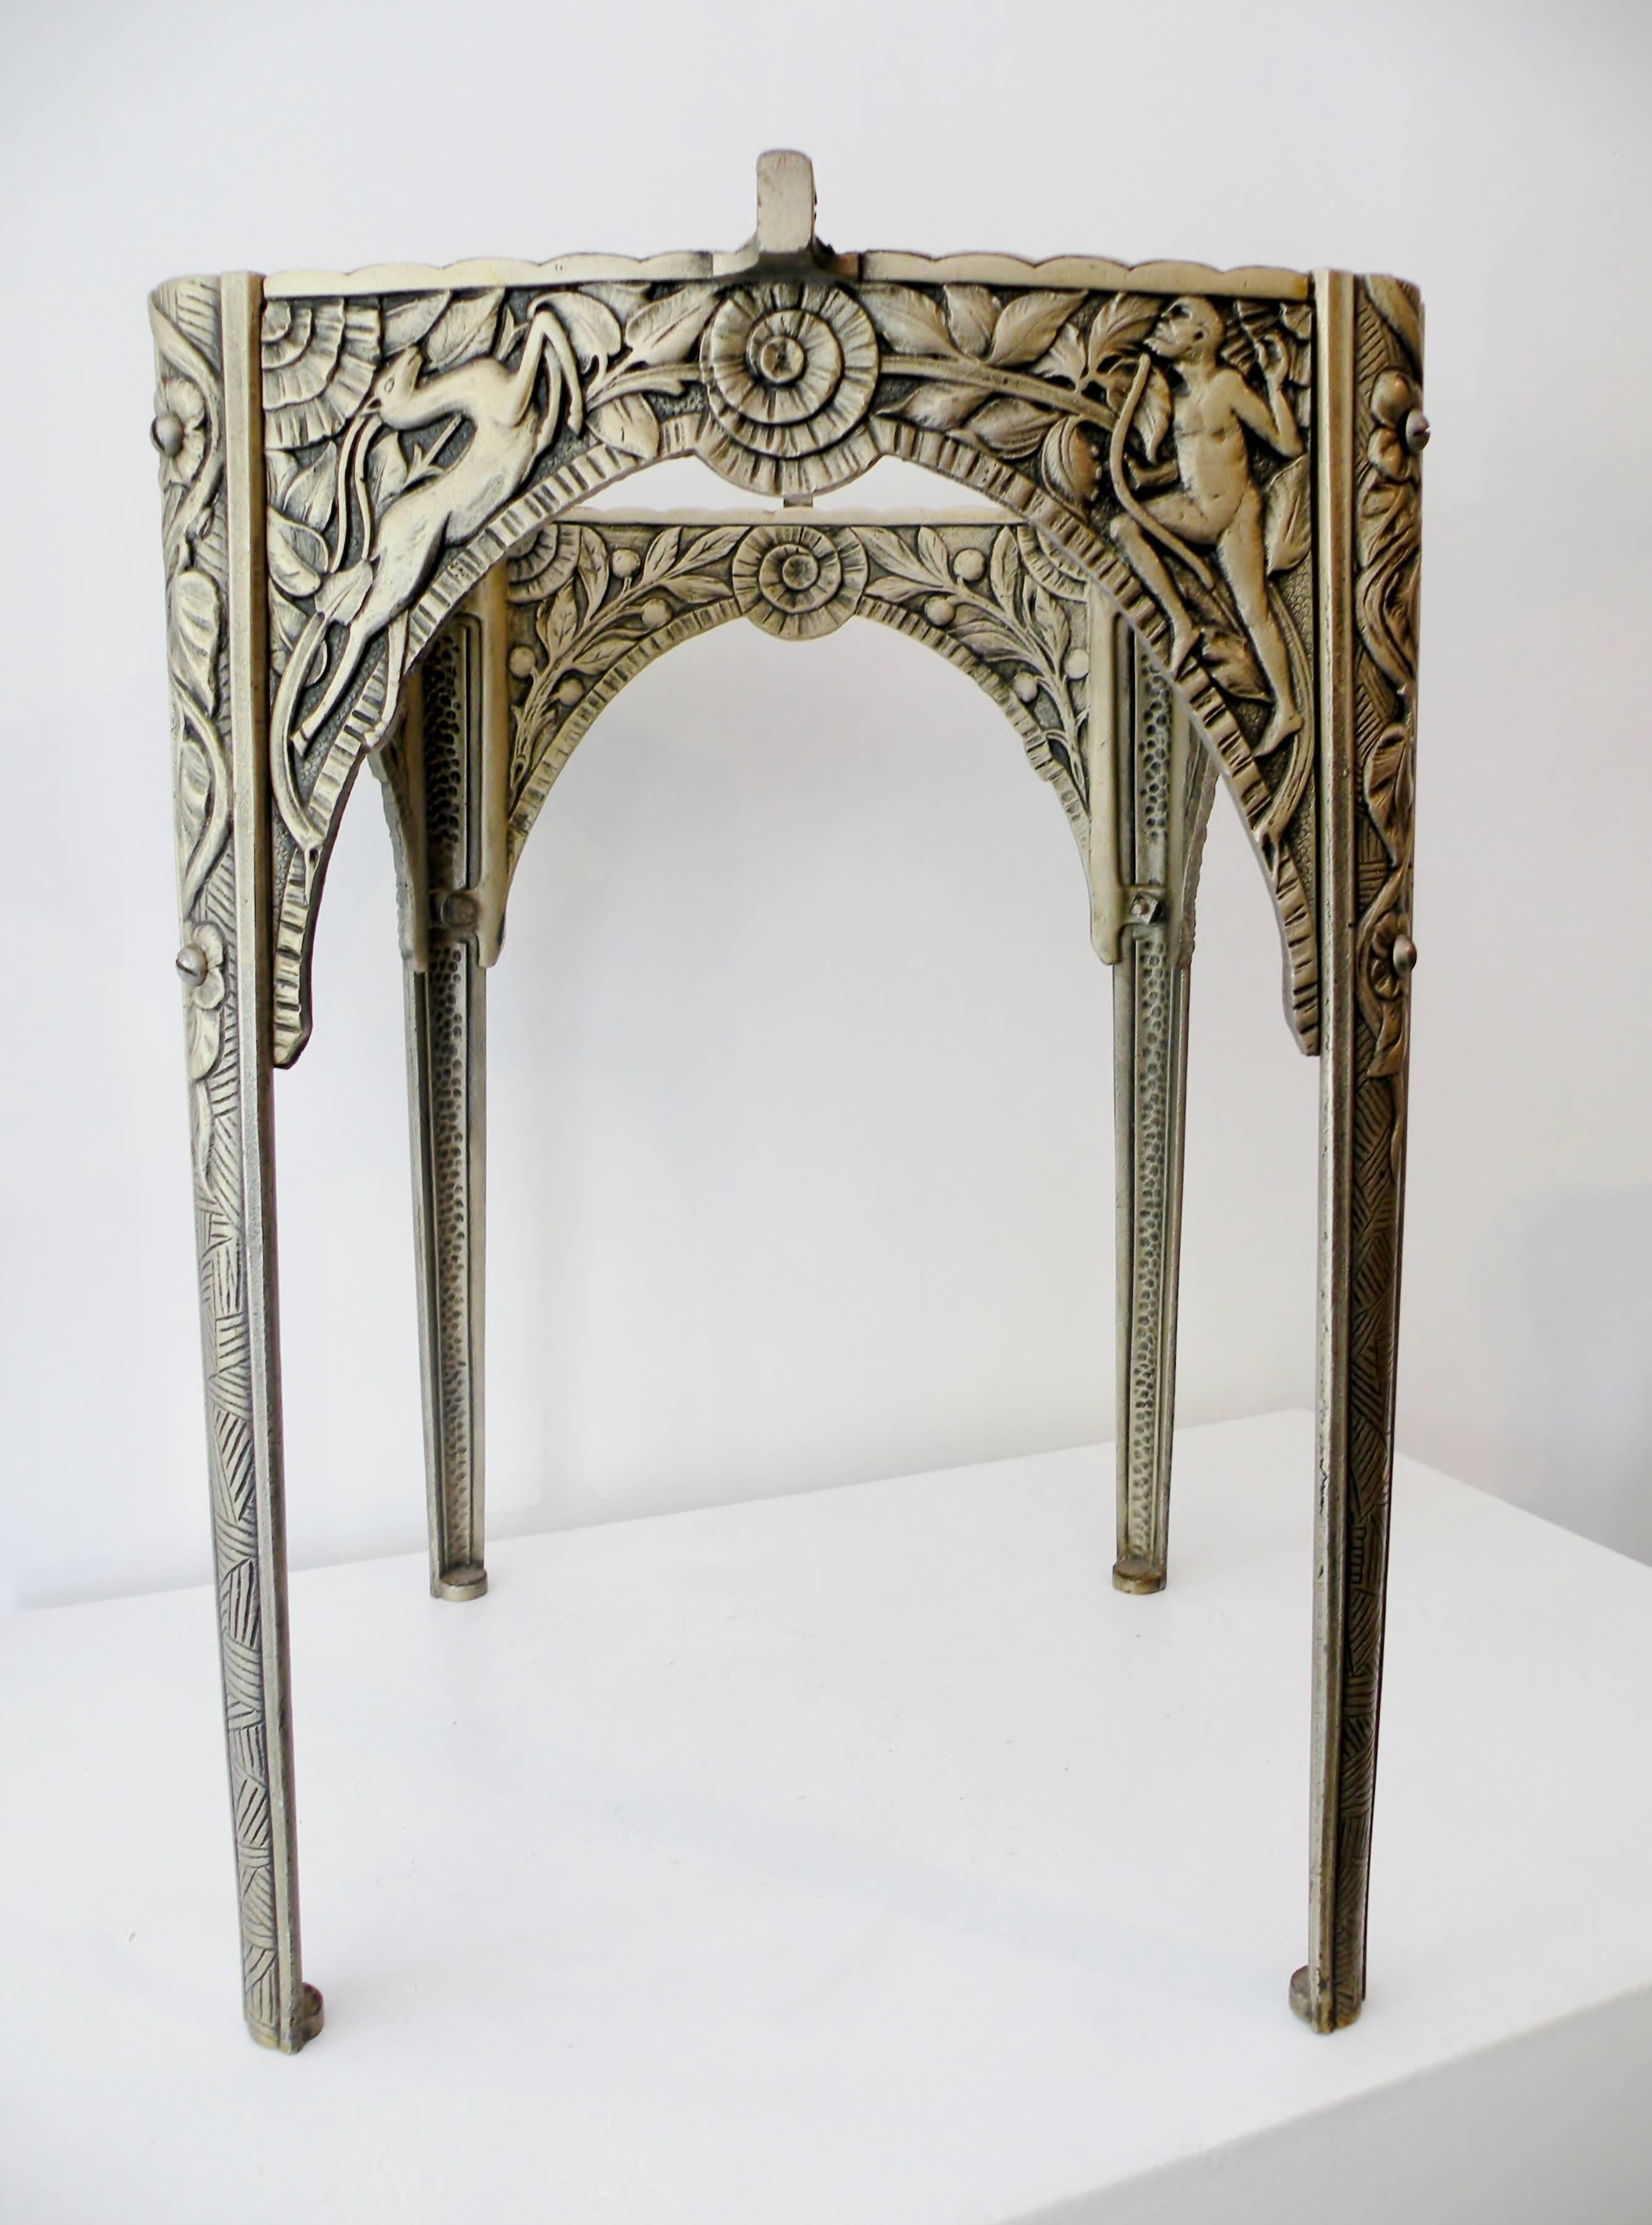 Finely detailed Art Deco cast iron cocktail accent table depicting scenes of Satyre and gazelle with folliage. Decoration extends to the interior as well. Silver and old clear lacquer surface finish. Unmarked and similar in design and manufacture to